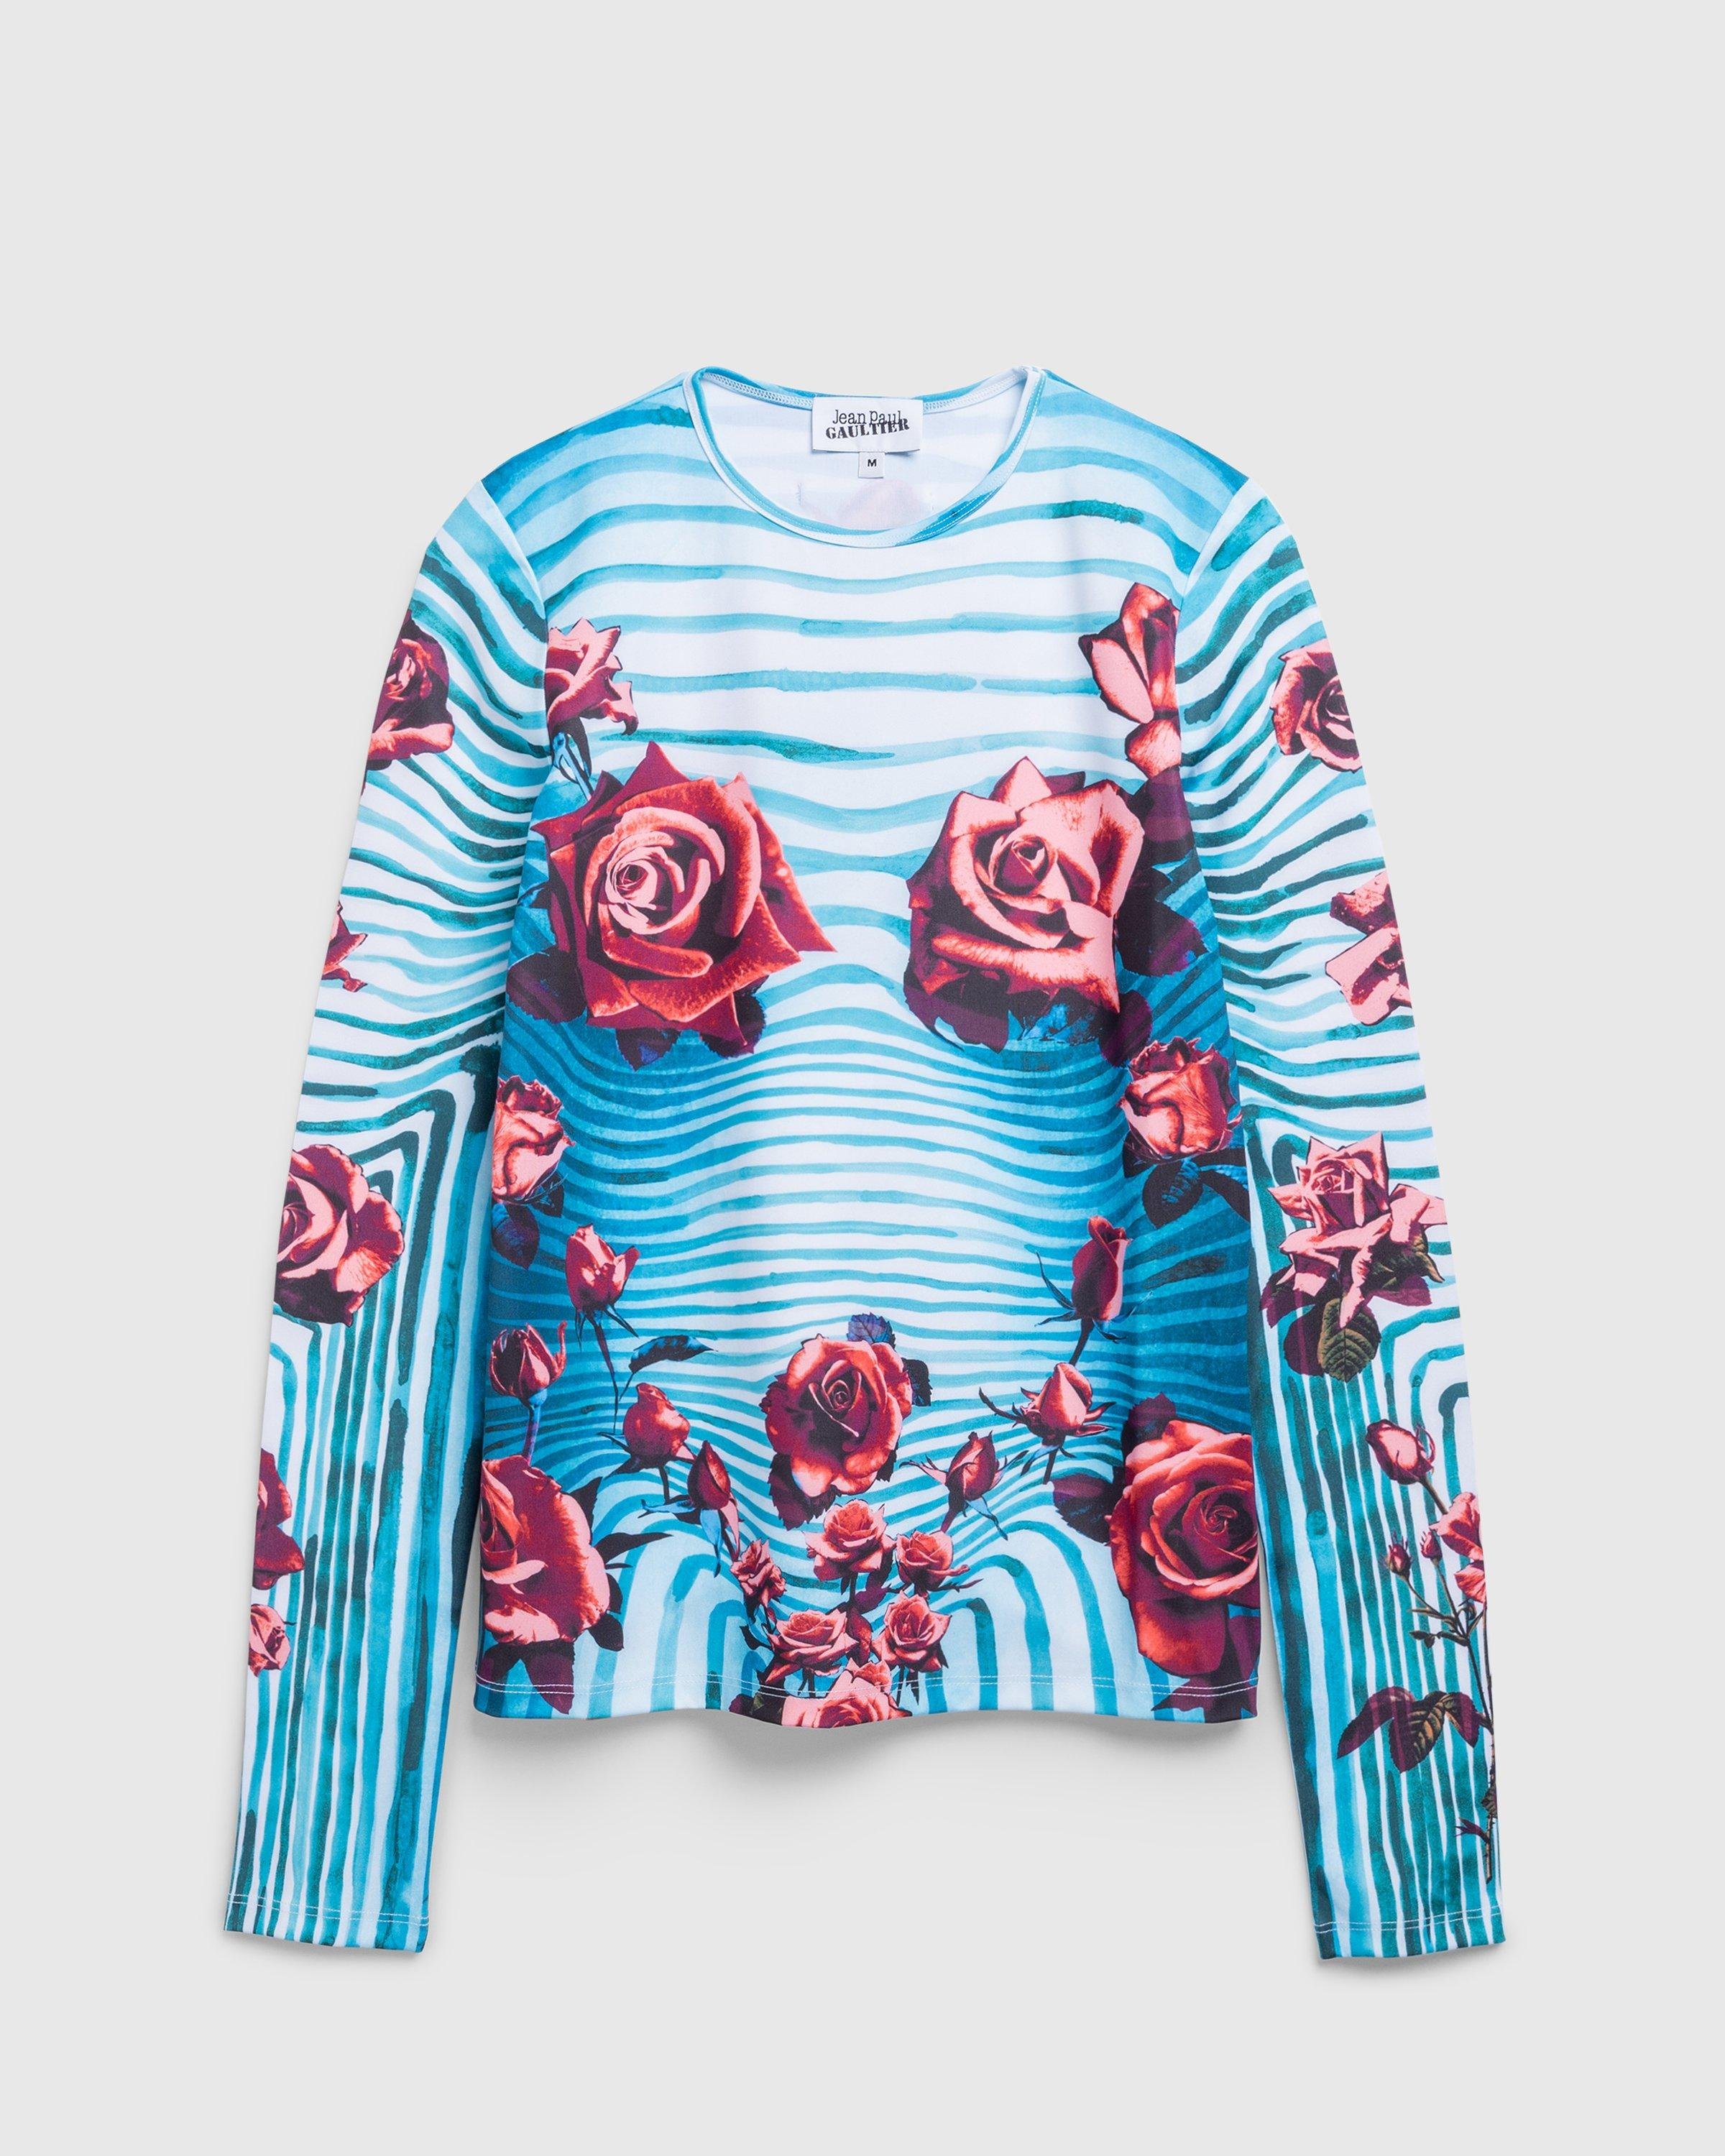 Jean Paul GaultierJersey Long-Sleeve Top Printed Flower Body Morphing Blue/Red/White by HIGHSNOBIETY